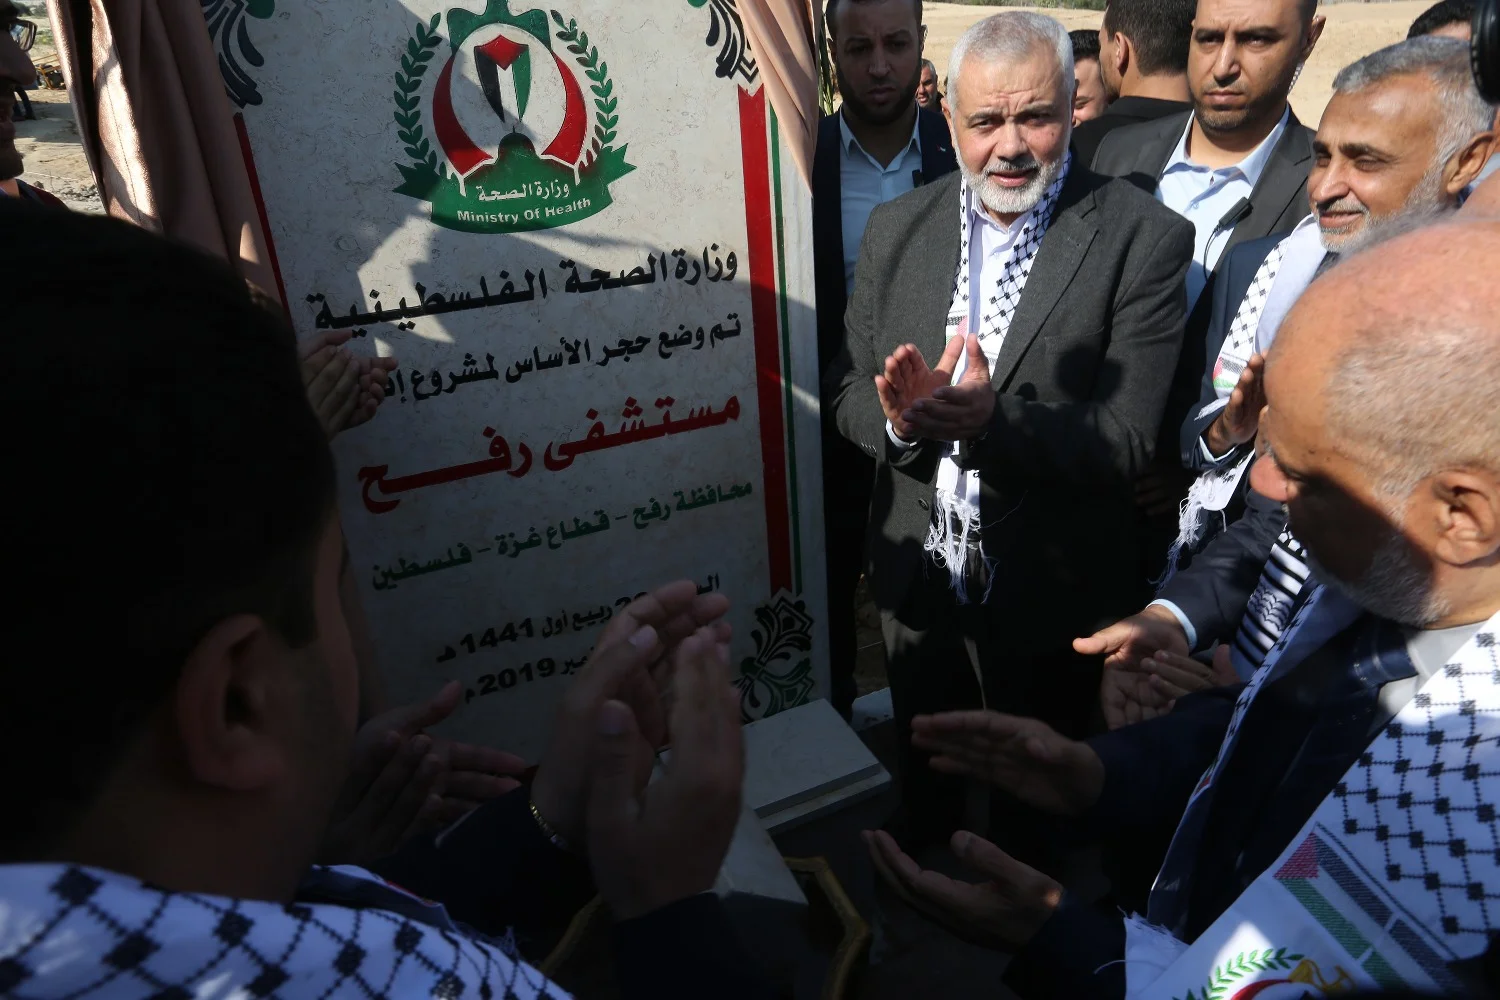 Hamas' ideas after the liberation of Palestine: Jews will be allowed to leave, but not all